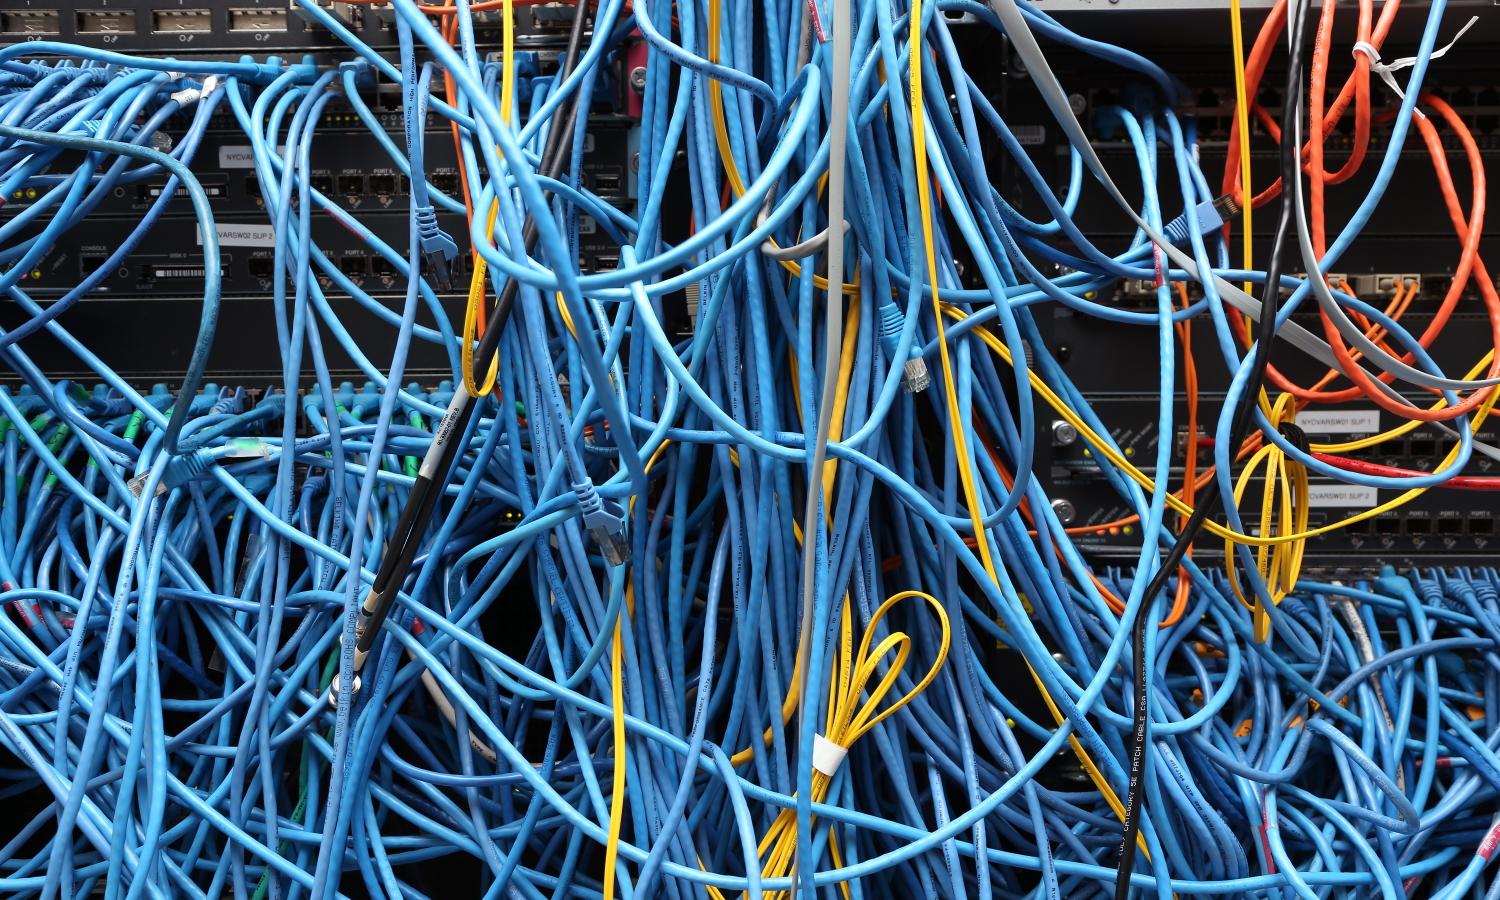 Network cables are plugged in a server room on Nov. 10, 2014, in New York City. A lot goes into the planning on how to ensure everyone attended the conference receives good service, said Bill Swearengen, strategist with Black Hat network operations center vendor IronNet. (Michael Bocchieri/Getty Images)